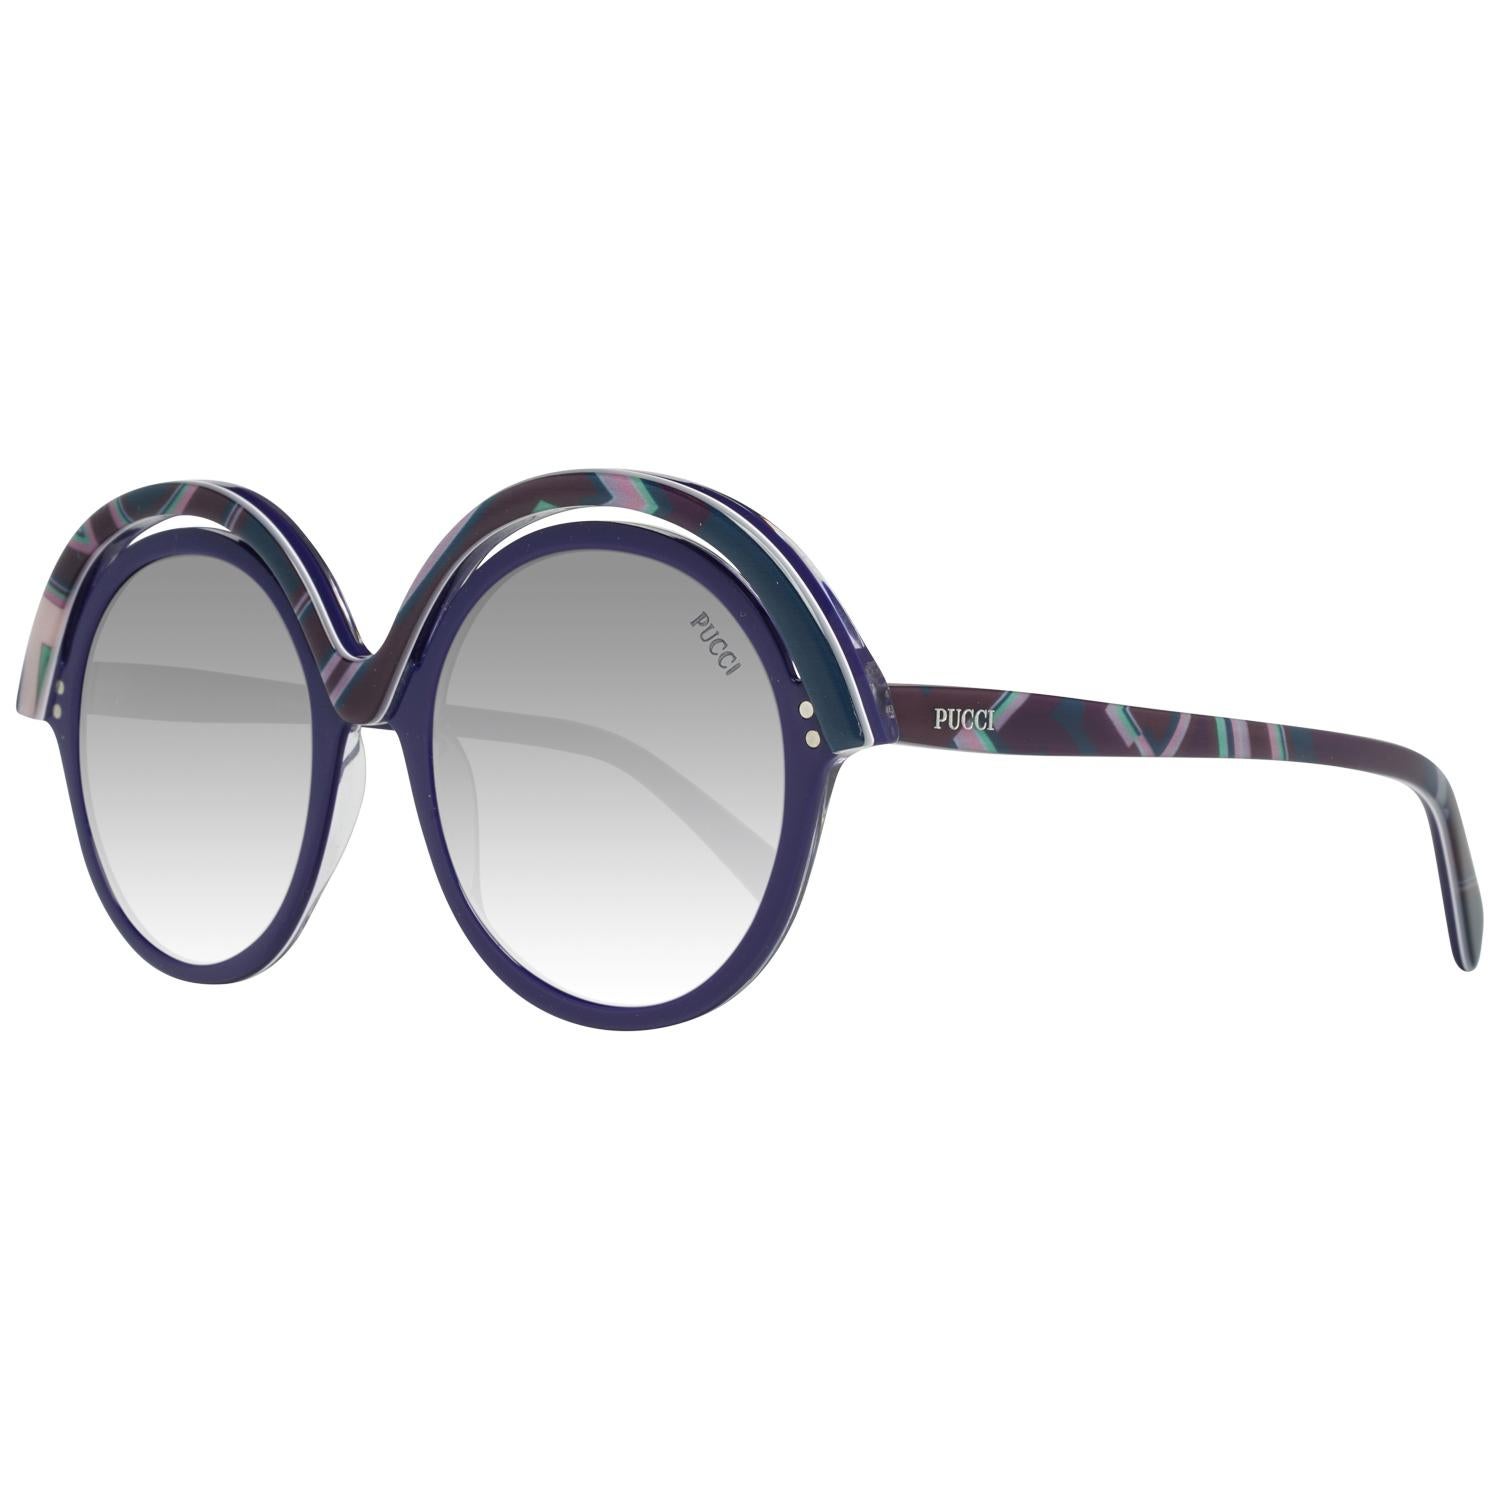 Details

MATERIAL: Acetate

COLOR: Blue

MODEL: EP0065 5392B

GENDER: Women

COUNTRY OF MANUFACTURE: Italy

TYPE: Sunglasses

ORIGINAL CASE?: Yes

STYLE: Round

OCCASION: Casual

FEATURES: Lightweight

LENS COLOR: Grey

LENS TECHNOLOGY: